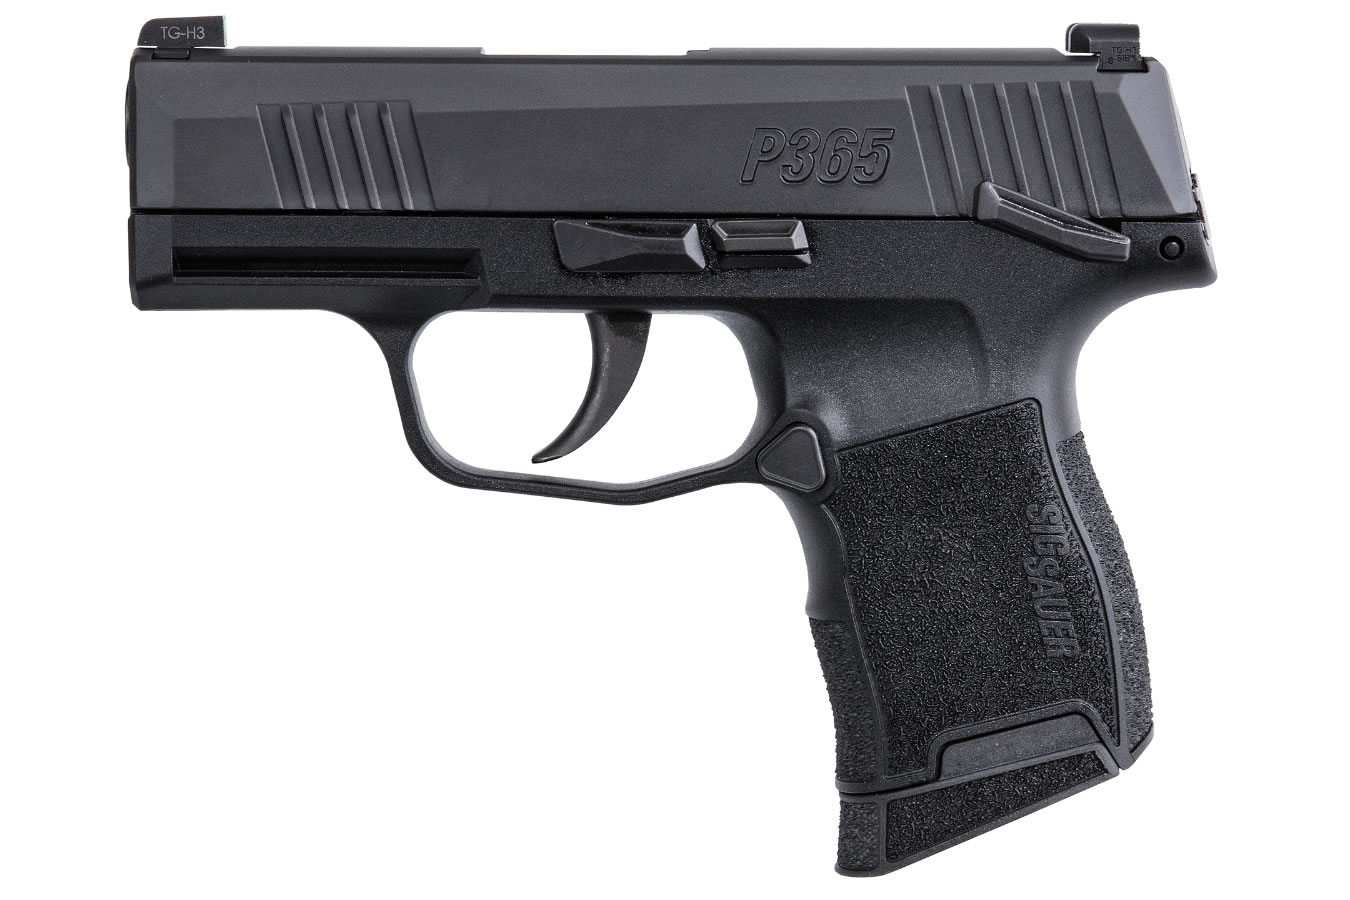 sig-sauer-p365-9mm-micro-compact-pistol-with-manual-safety-vance-outdoors